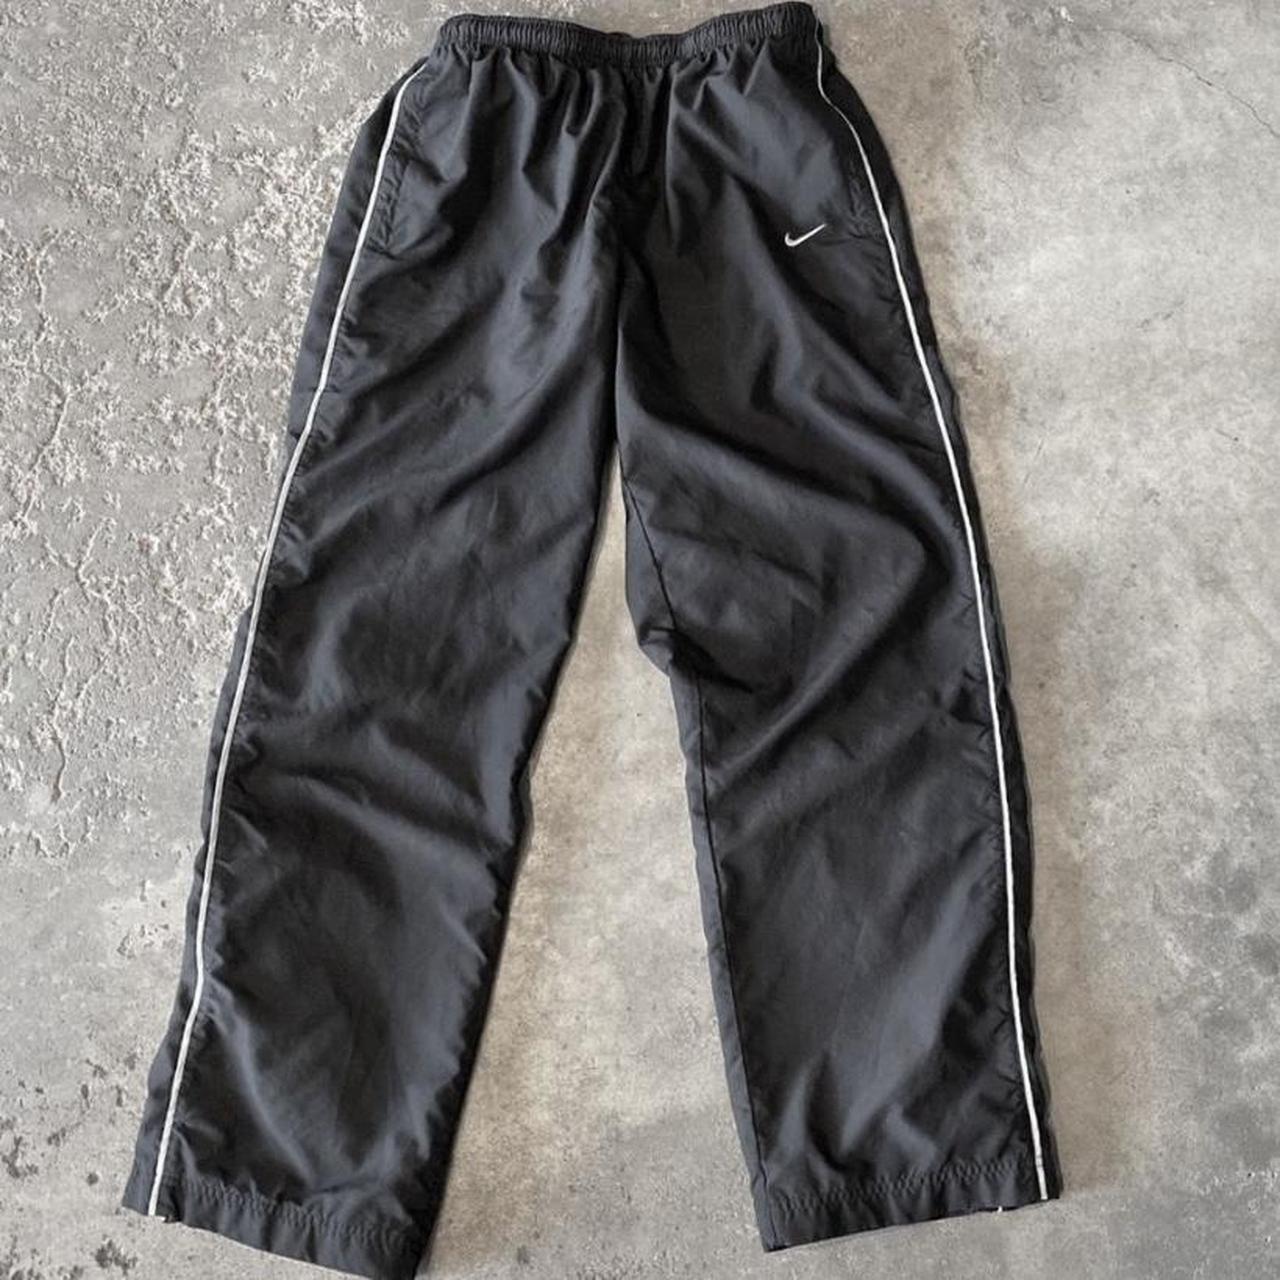 2000’s Nike track pants ad dont buy, individual... - Depop